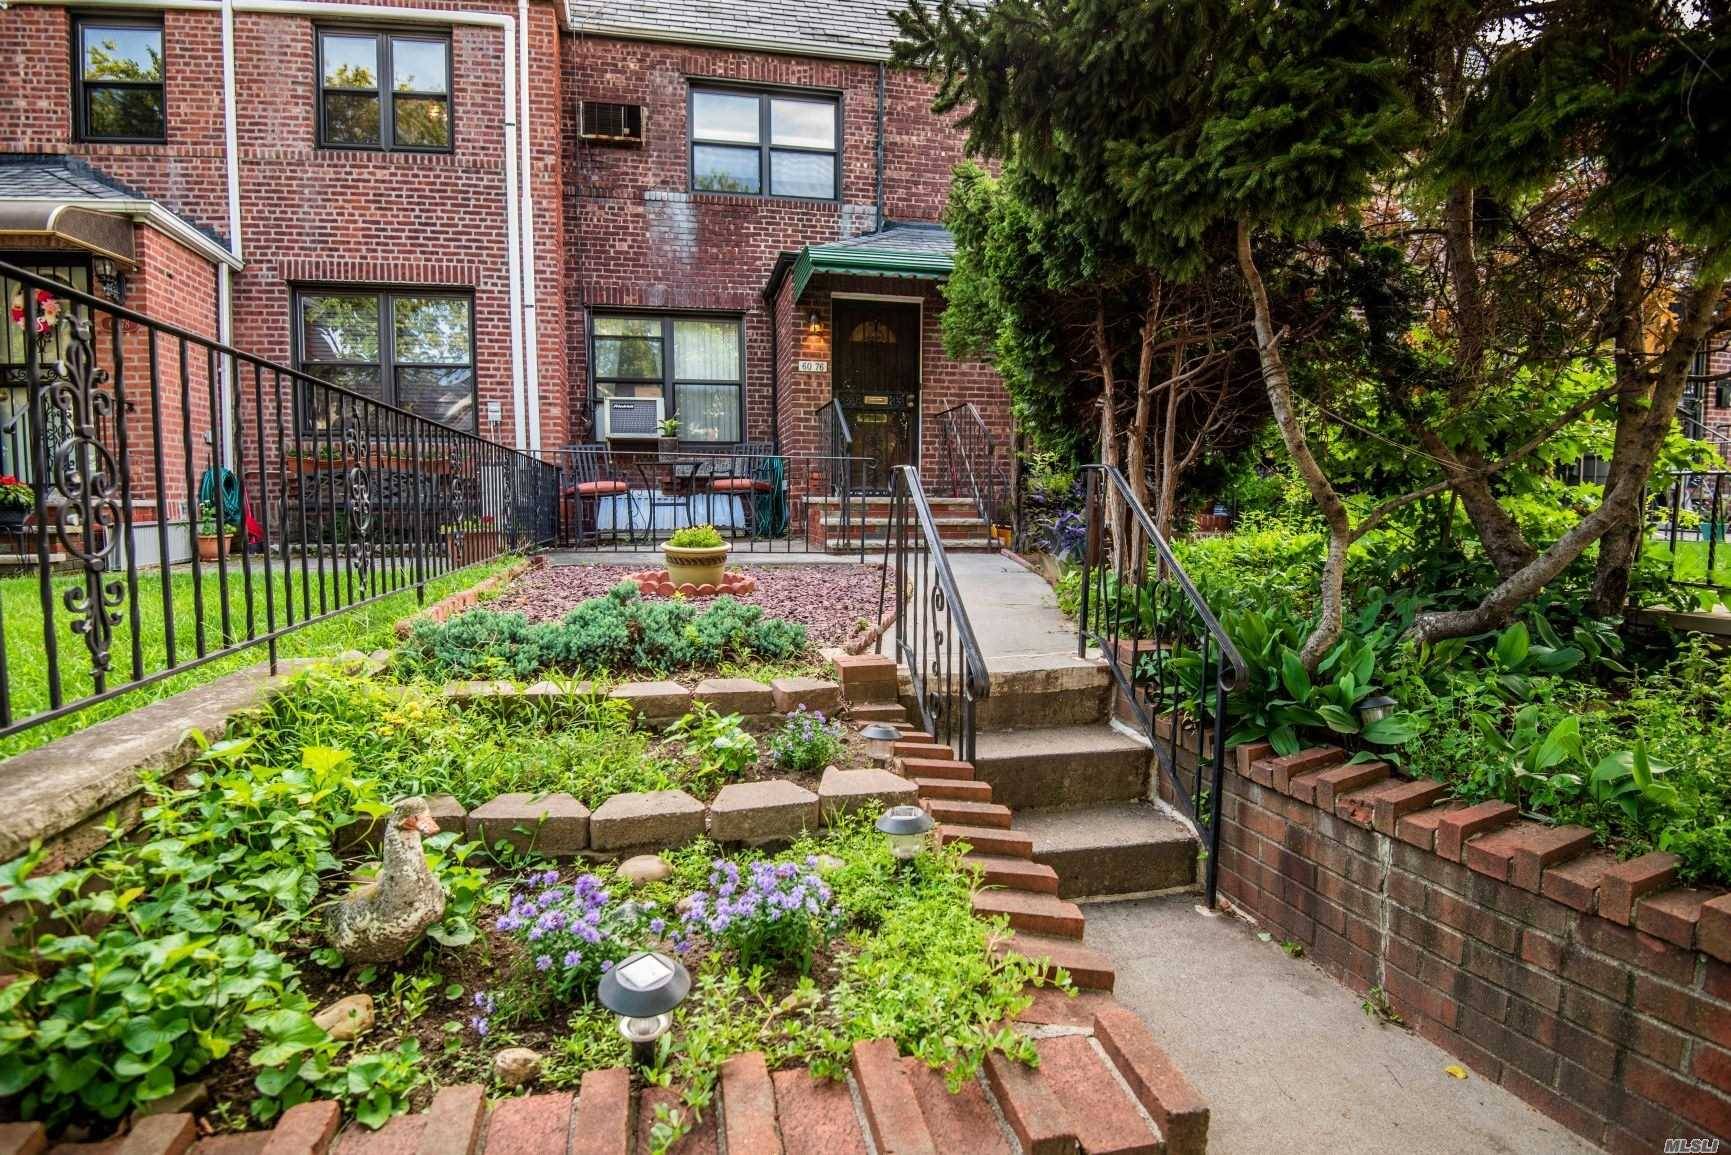 Lovely Attached Single Family Brick Home Located Off Eliot Ave In The Desirable Maspeth Area.